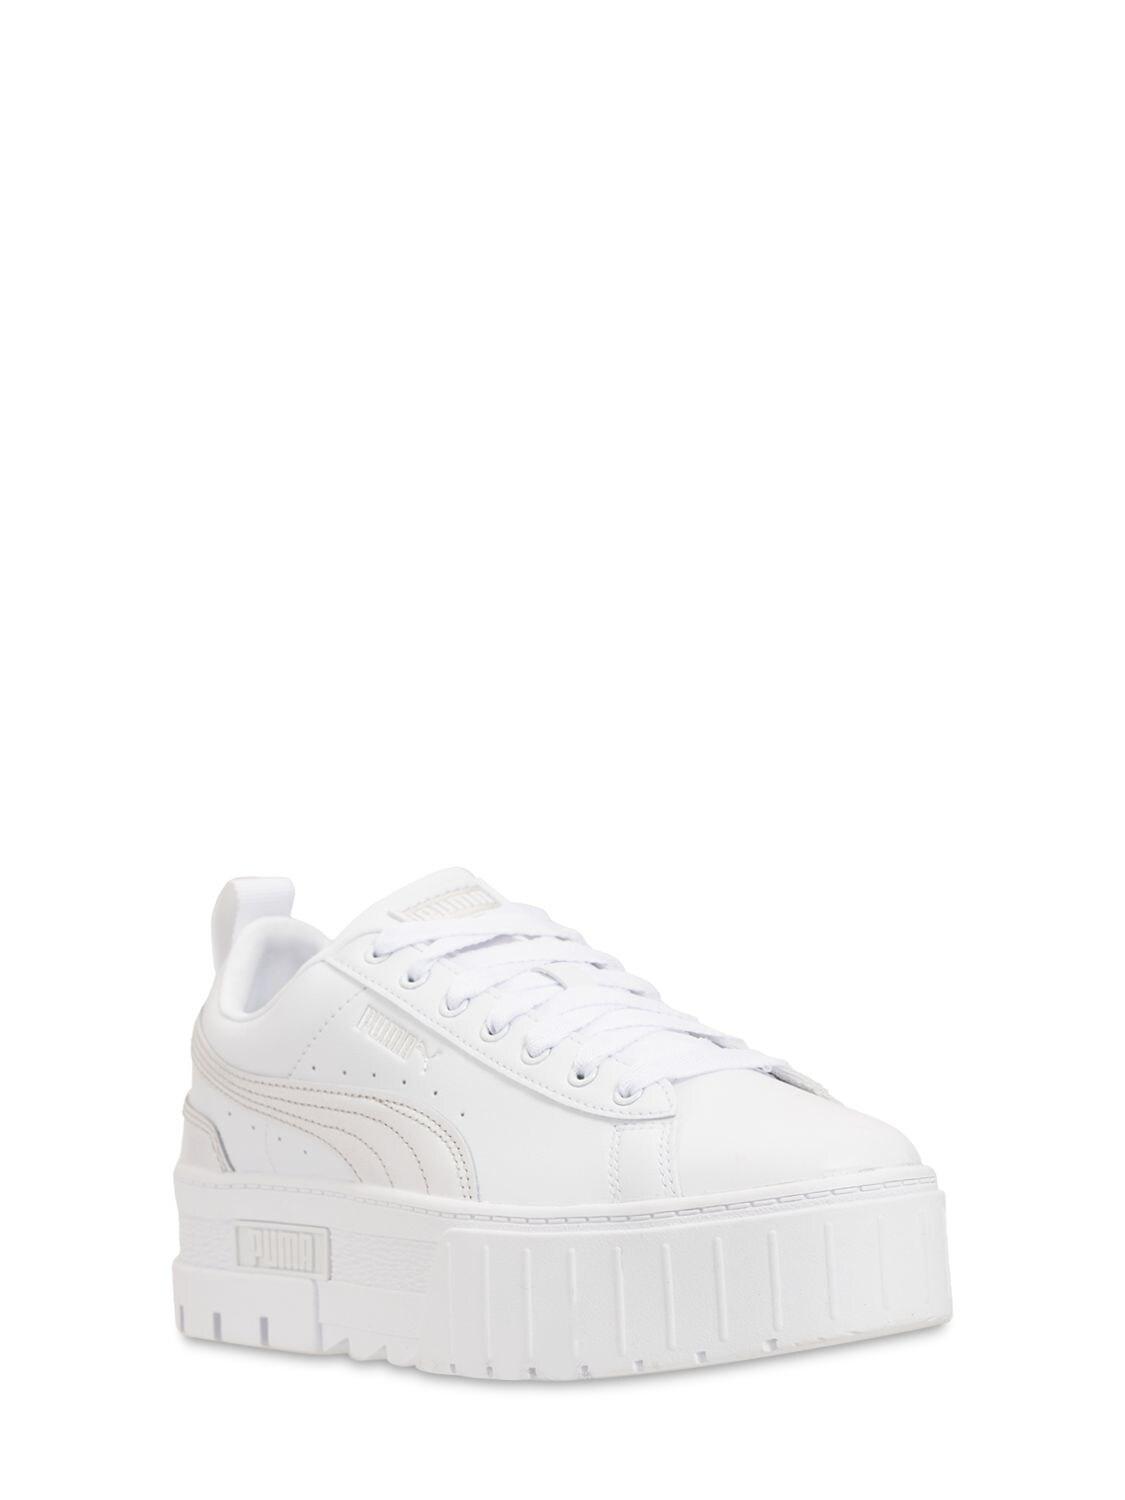 PUMA Synthetic Mayze Glow Platform Sneakers in White/Silver (White) | Lyst